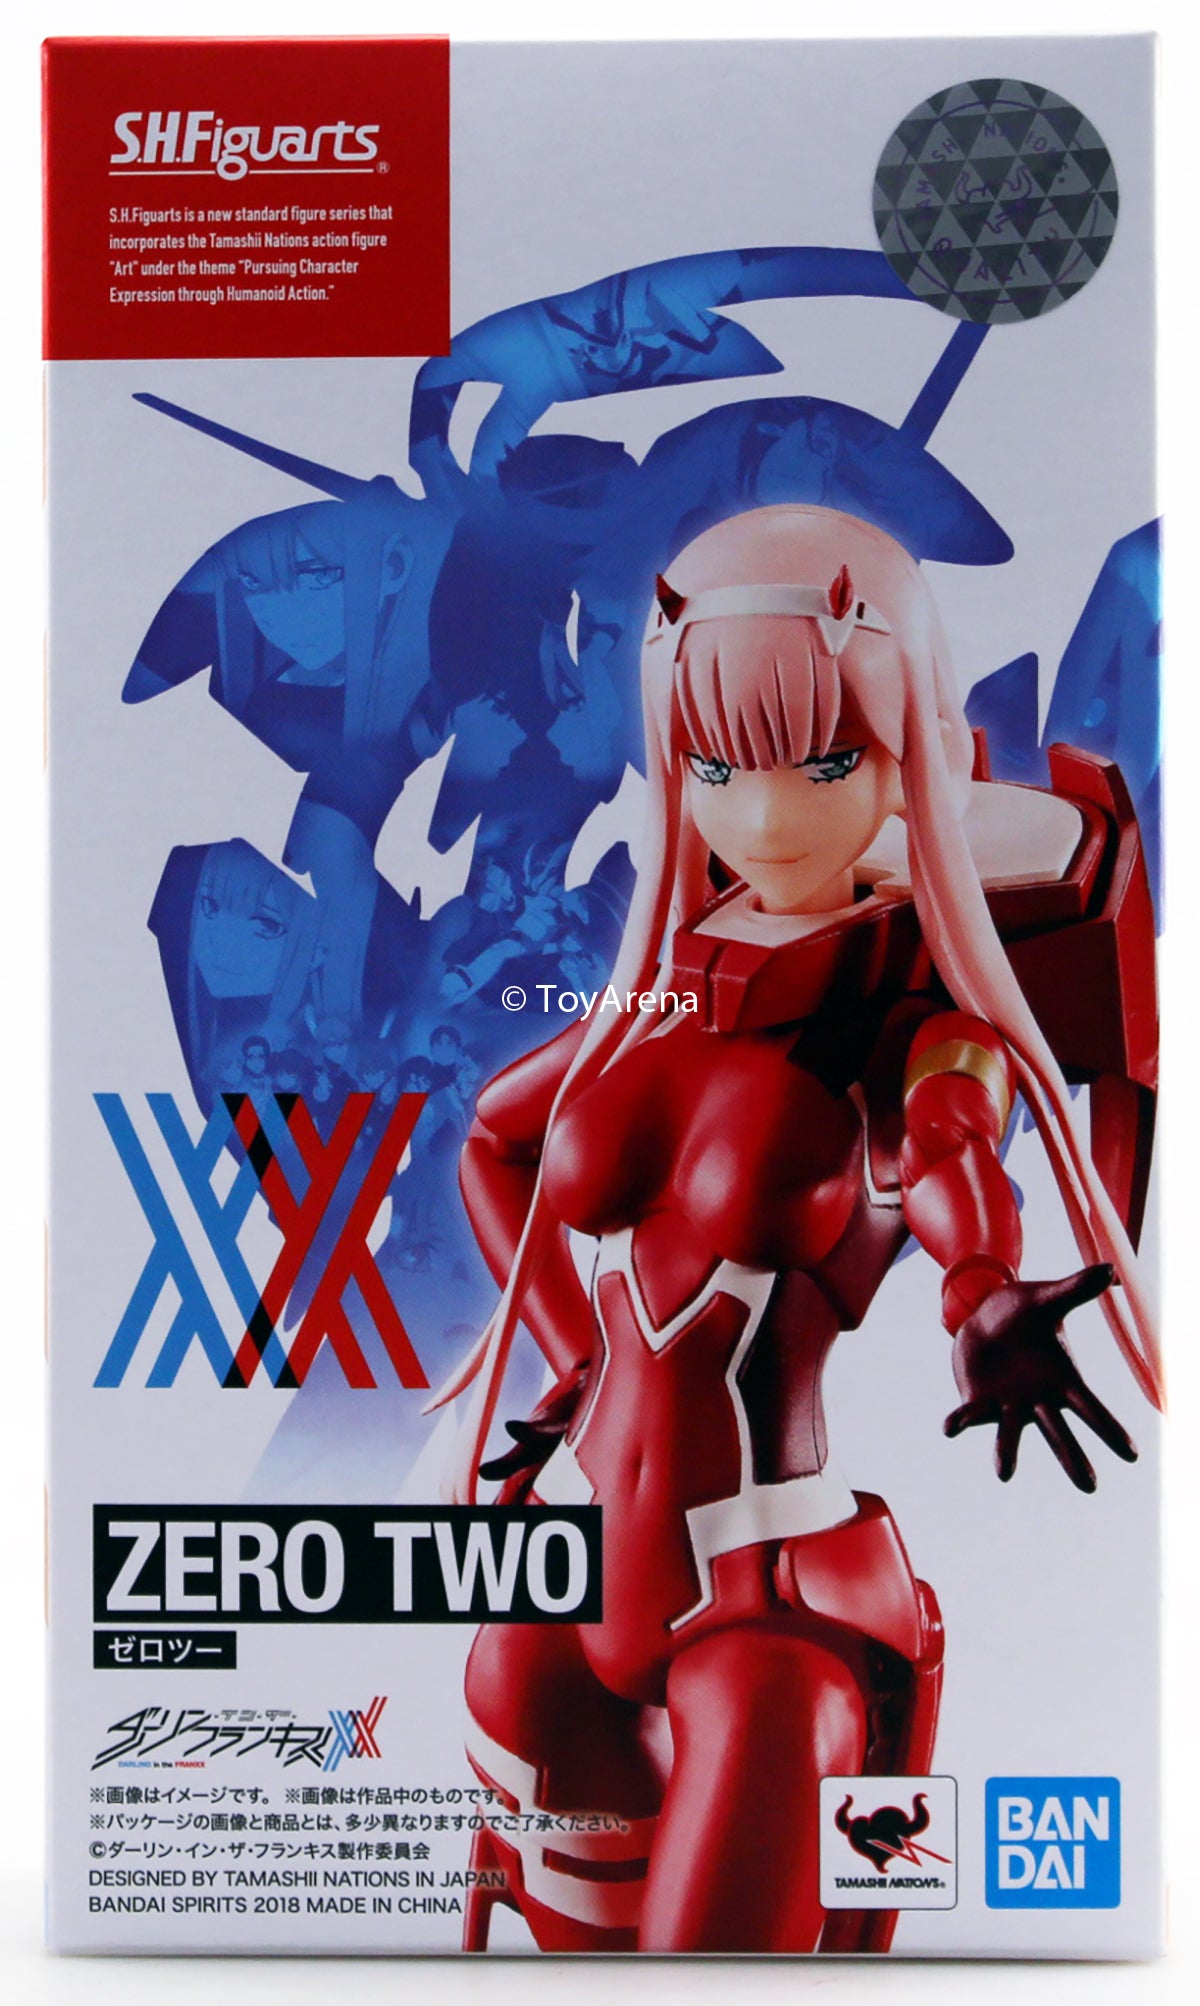 S.H. Figuarts Zero Two Darling in the Franxx Action Figure